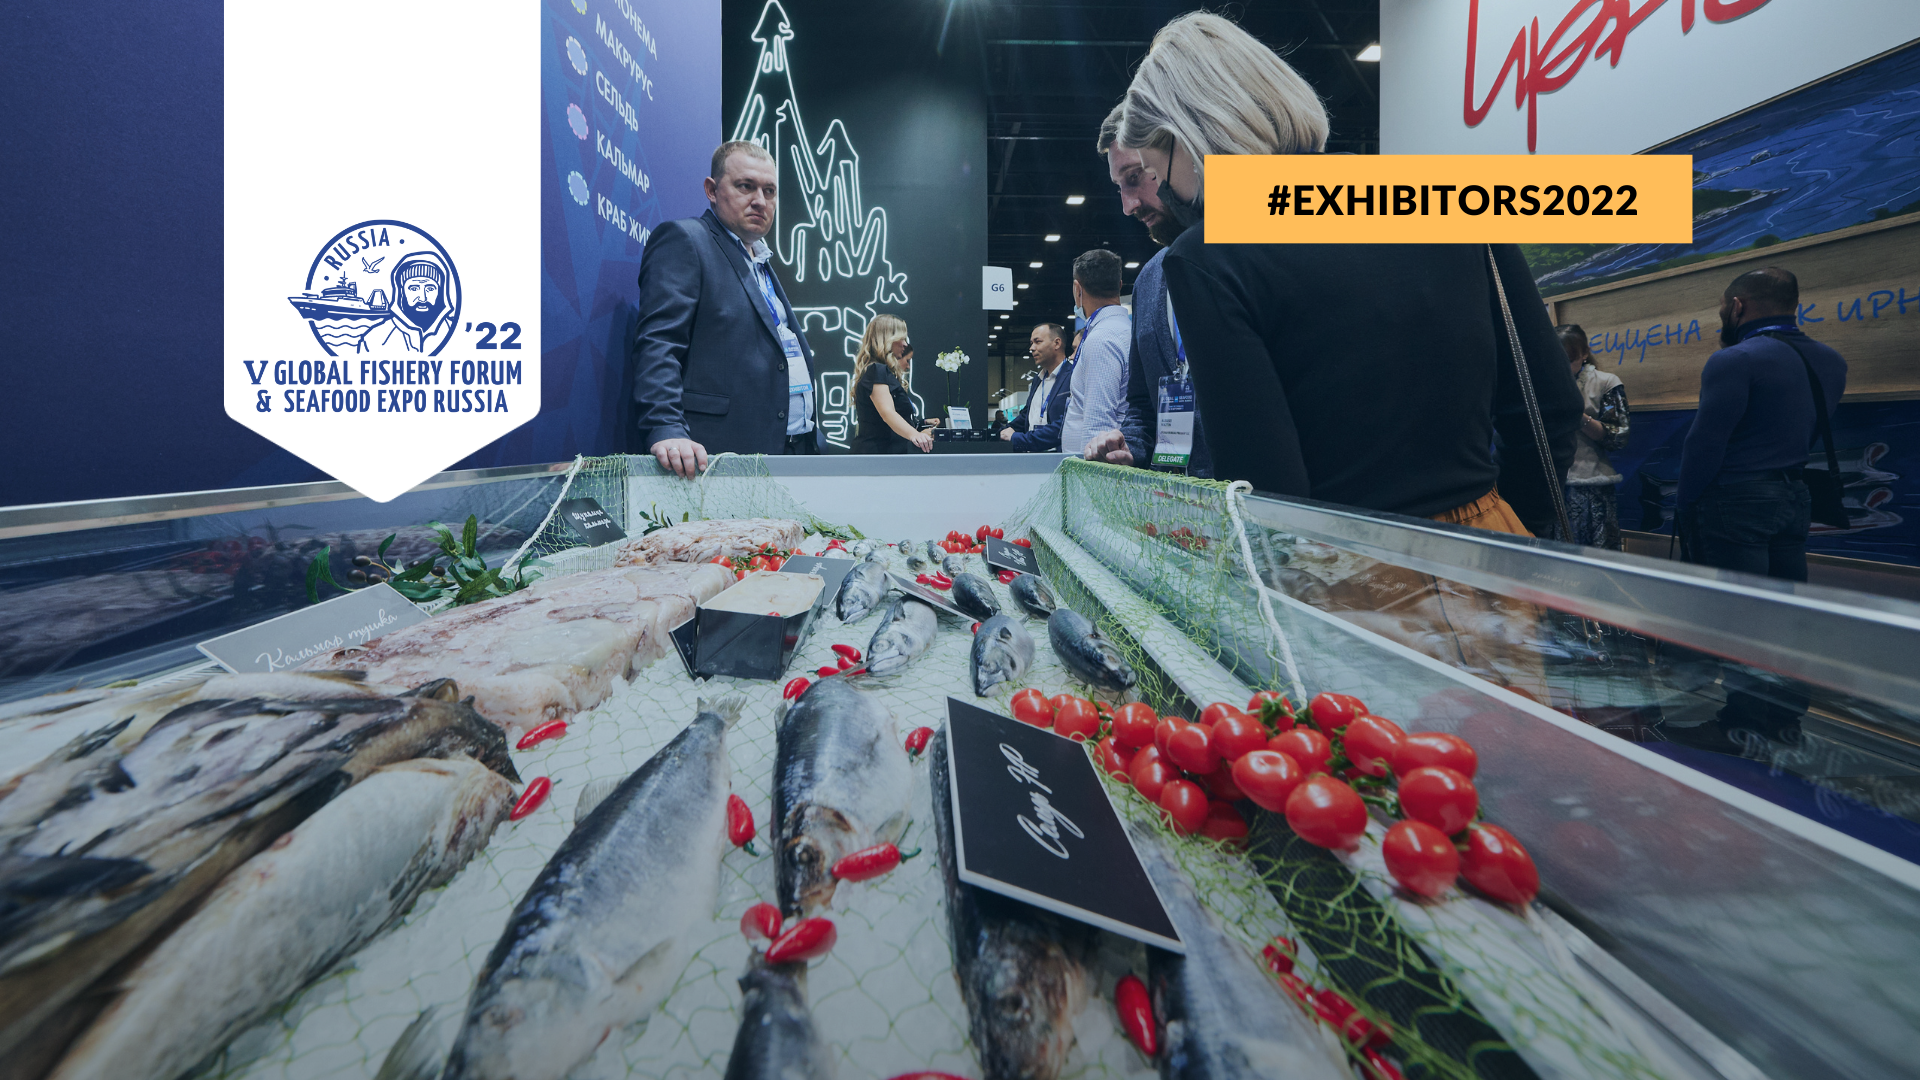 Seafood Expo Russia 2022: Overview of New Exhibitors #2